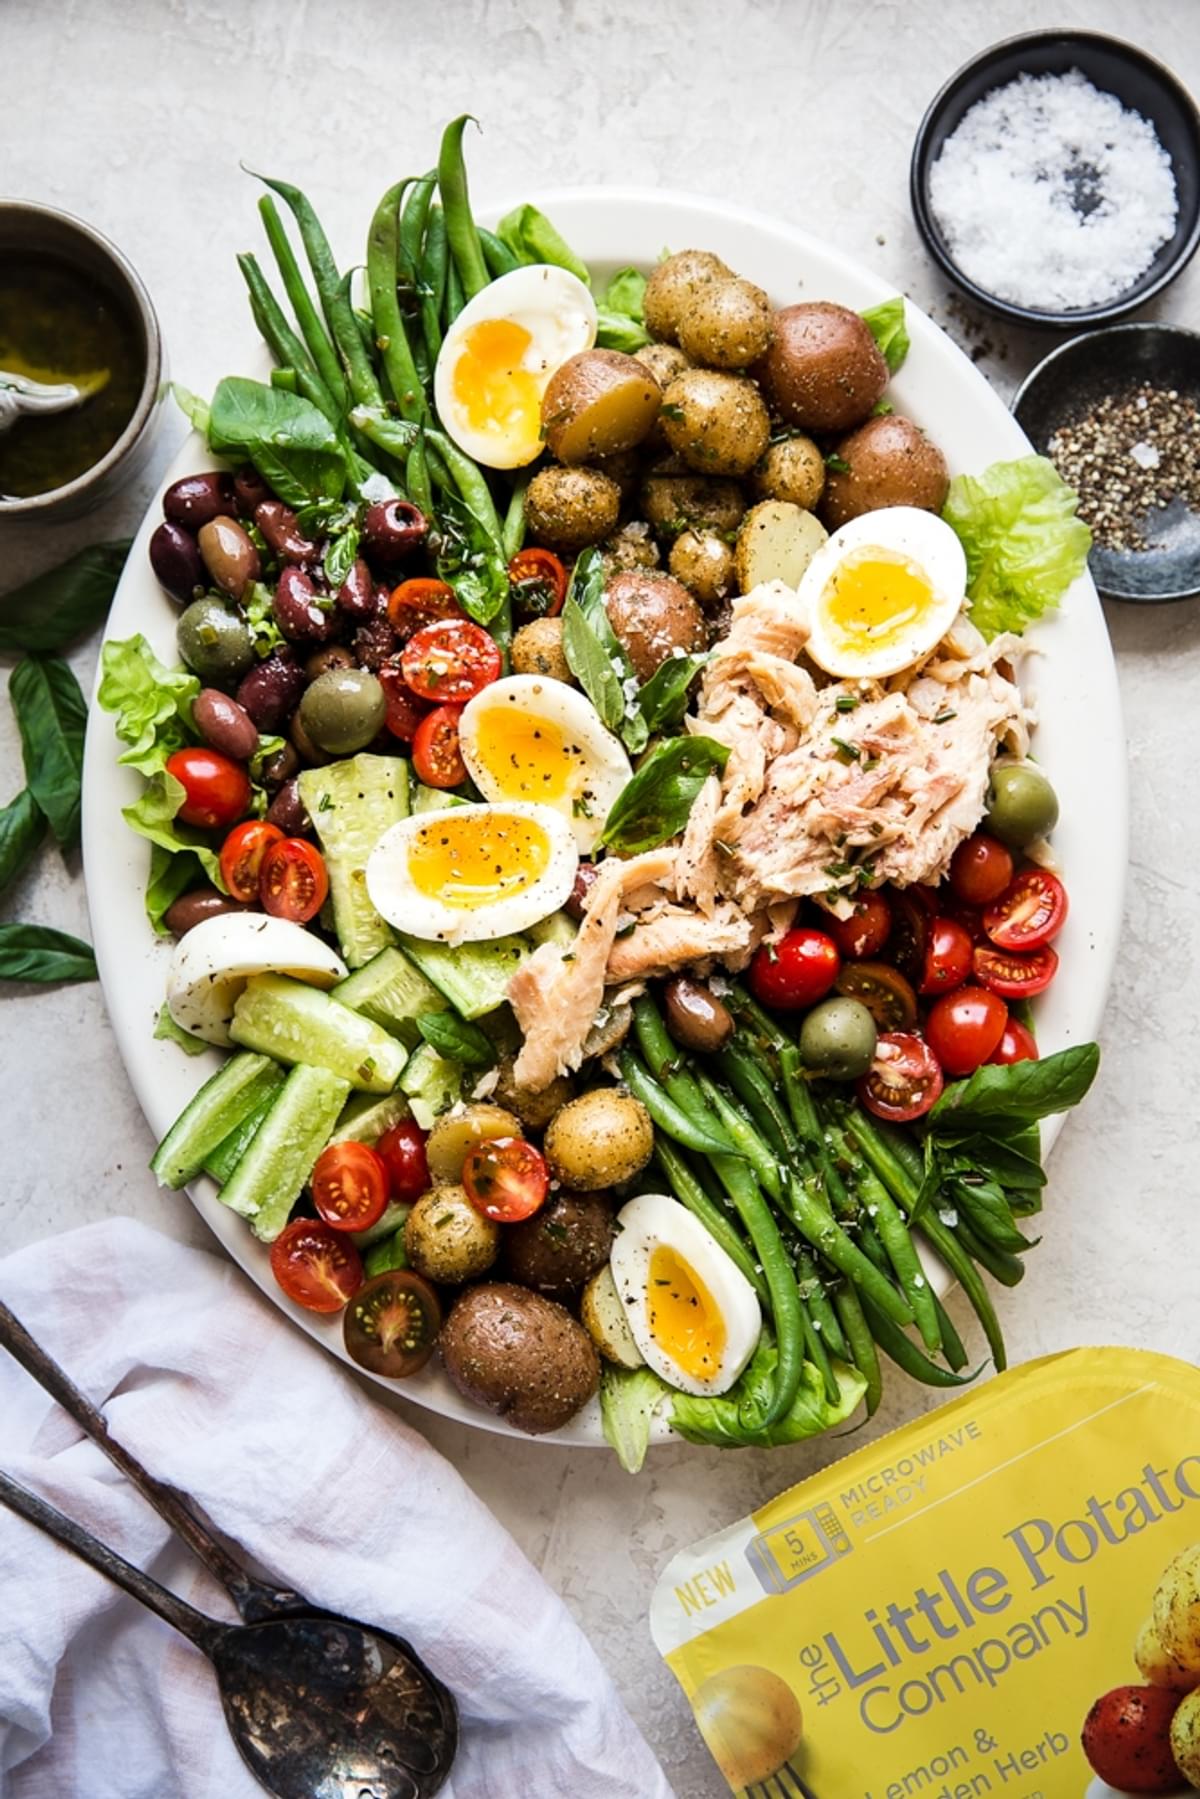 Classic Salad Niçoise with potatoes, cucumber, olives, green beans and smoked trout.